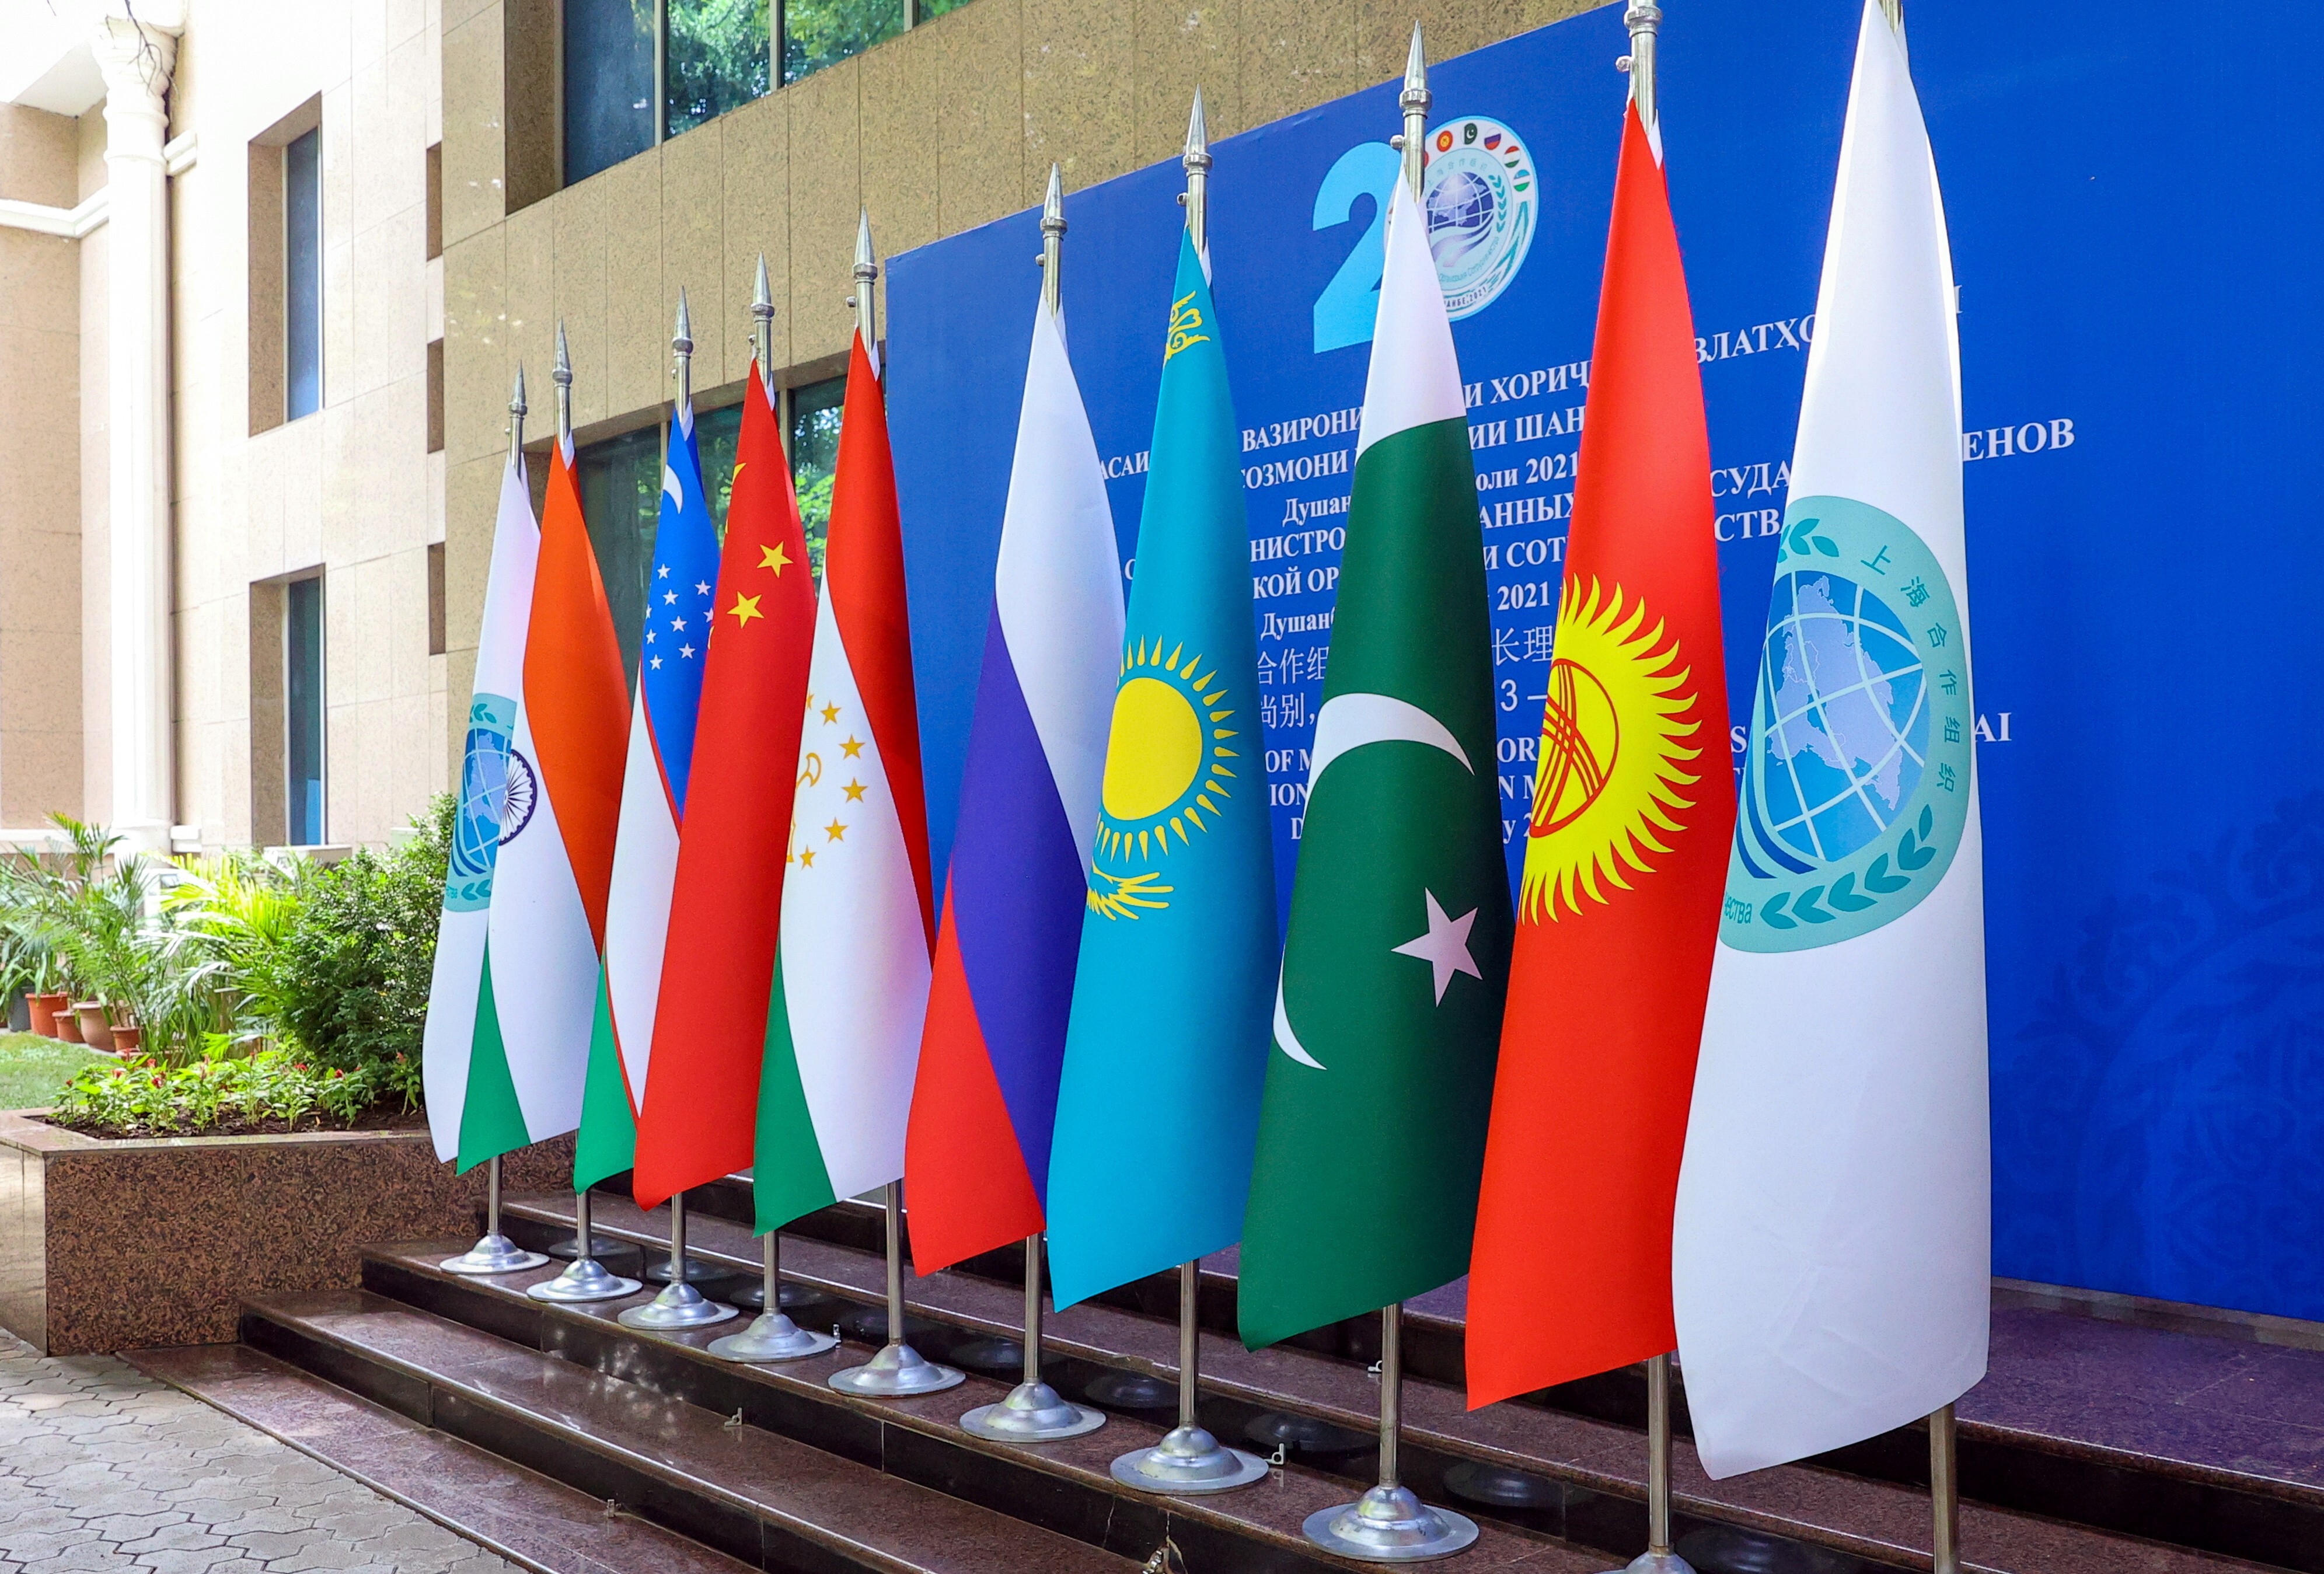 Afghanistan will be on the agenda for the SCO summit in Dushanbe, Tajikistan, this week. Photo: Getty Images